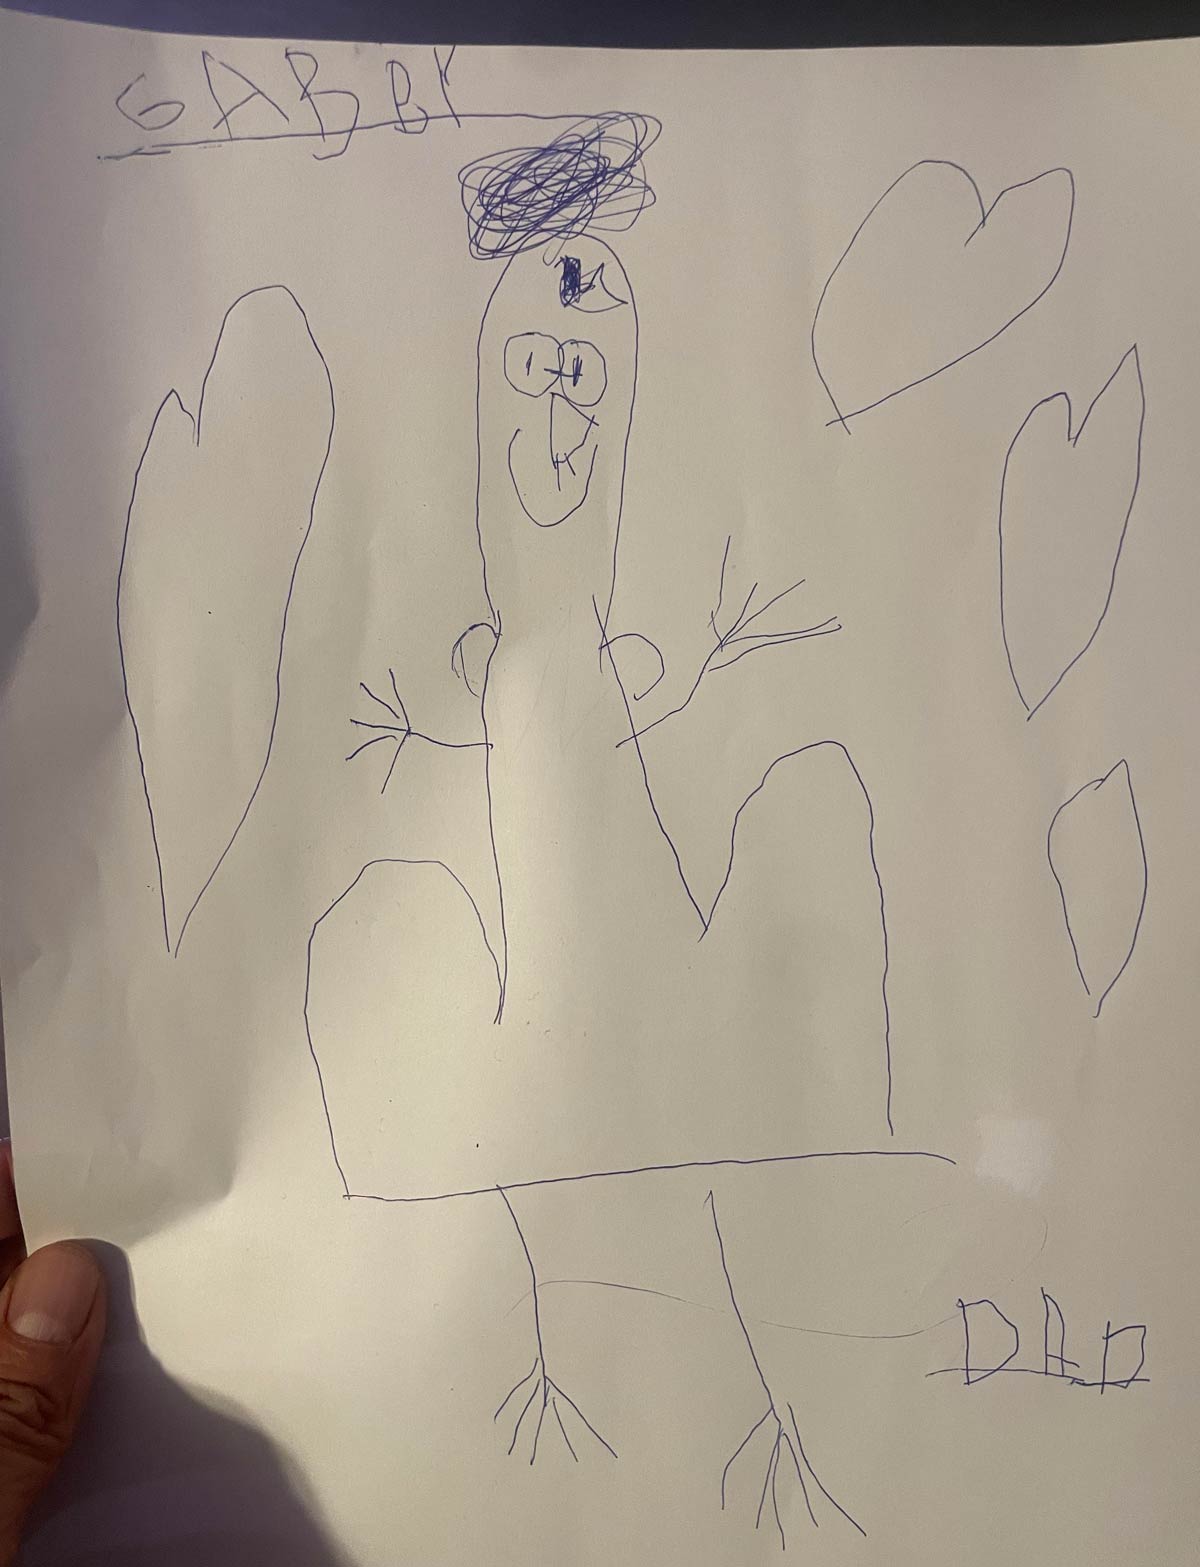 My 5 year old daughter drew a picture of me and I’m not sure if I should be offended